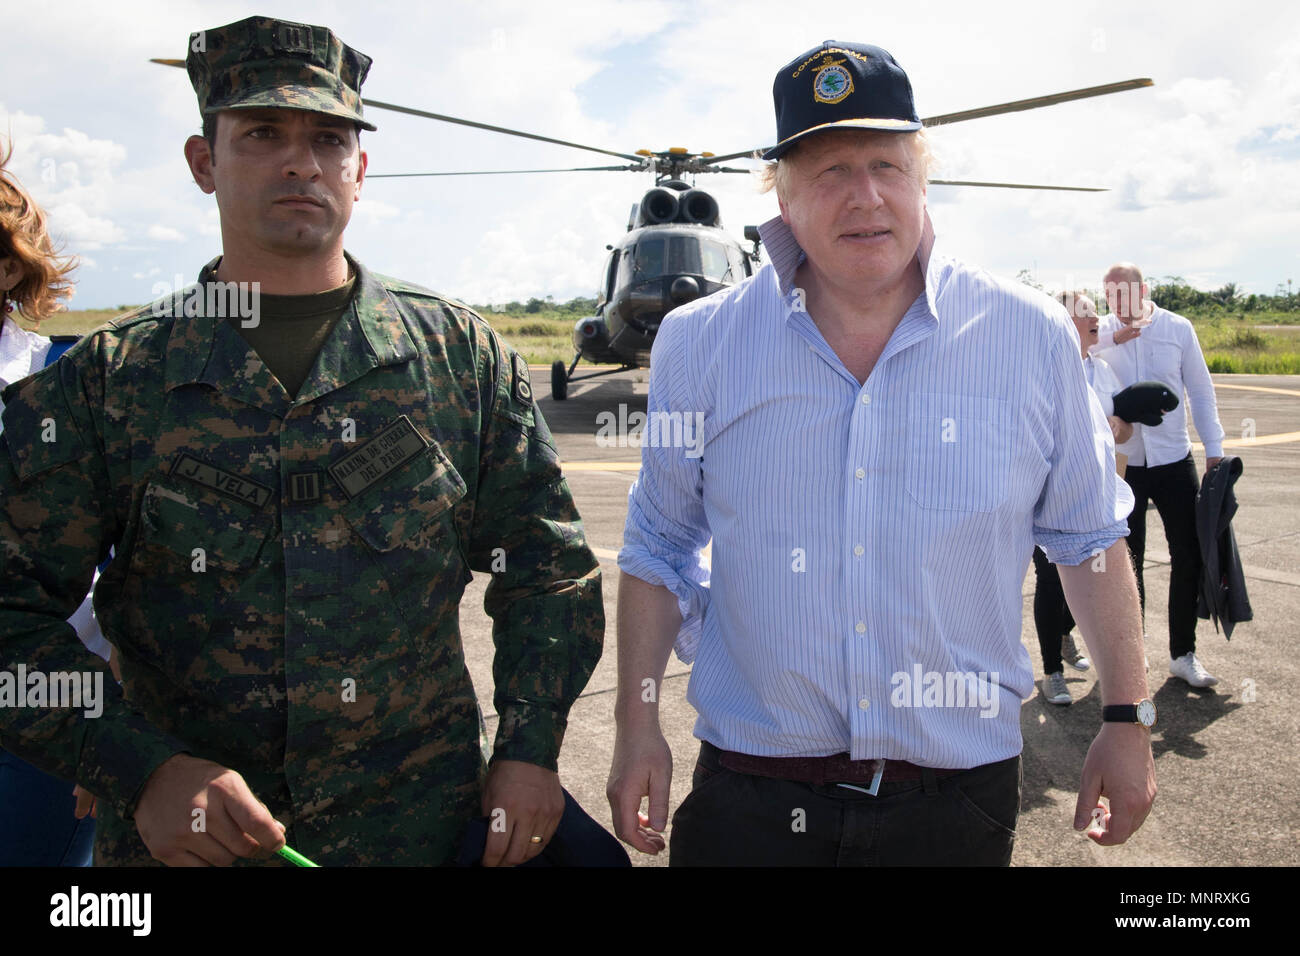 Foreign Secretary Boris Johnson visits the Nanay Naval Base on the Amazon river near Iquitos in Peru to meet members of the Peruvian armed forces who are trying to prevent the illegal wildlife trade. Stock Photo